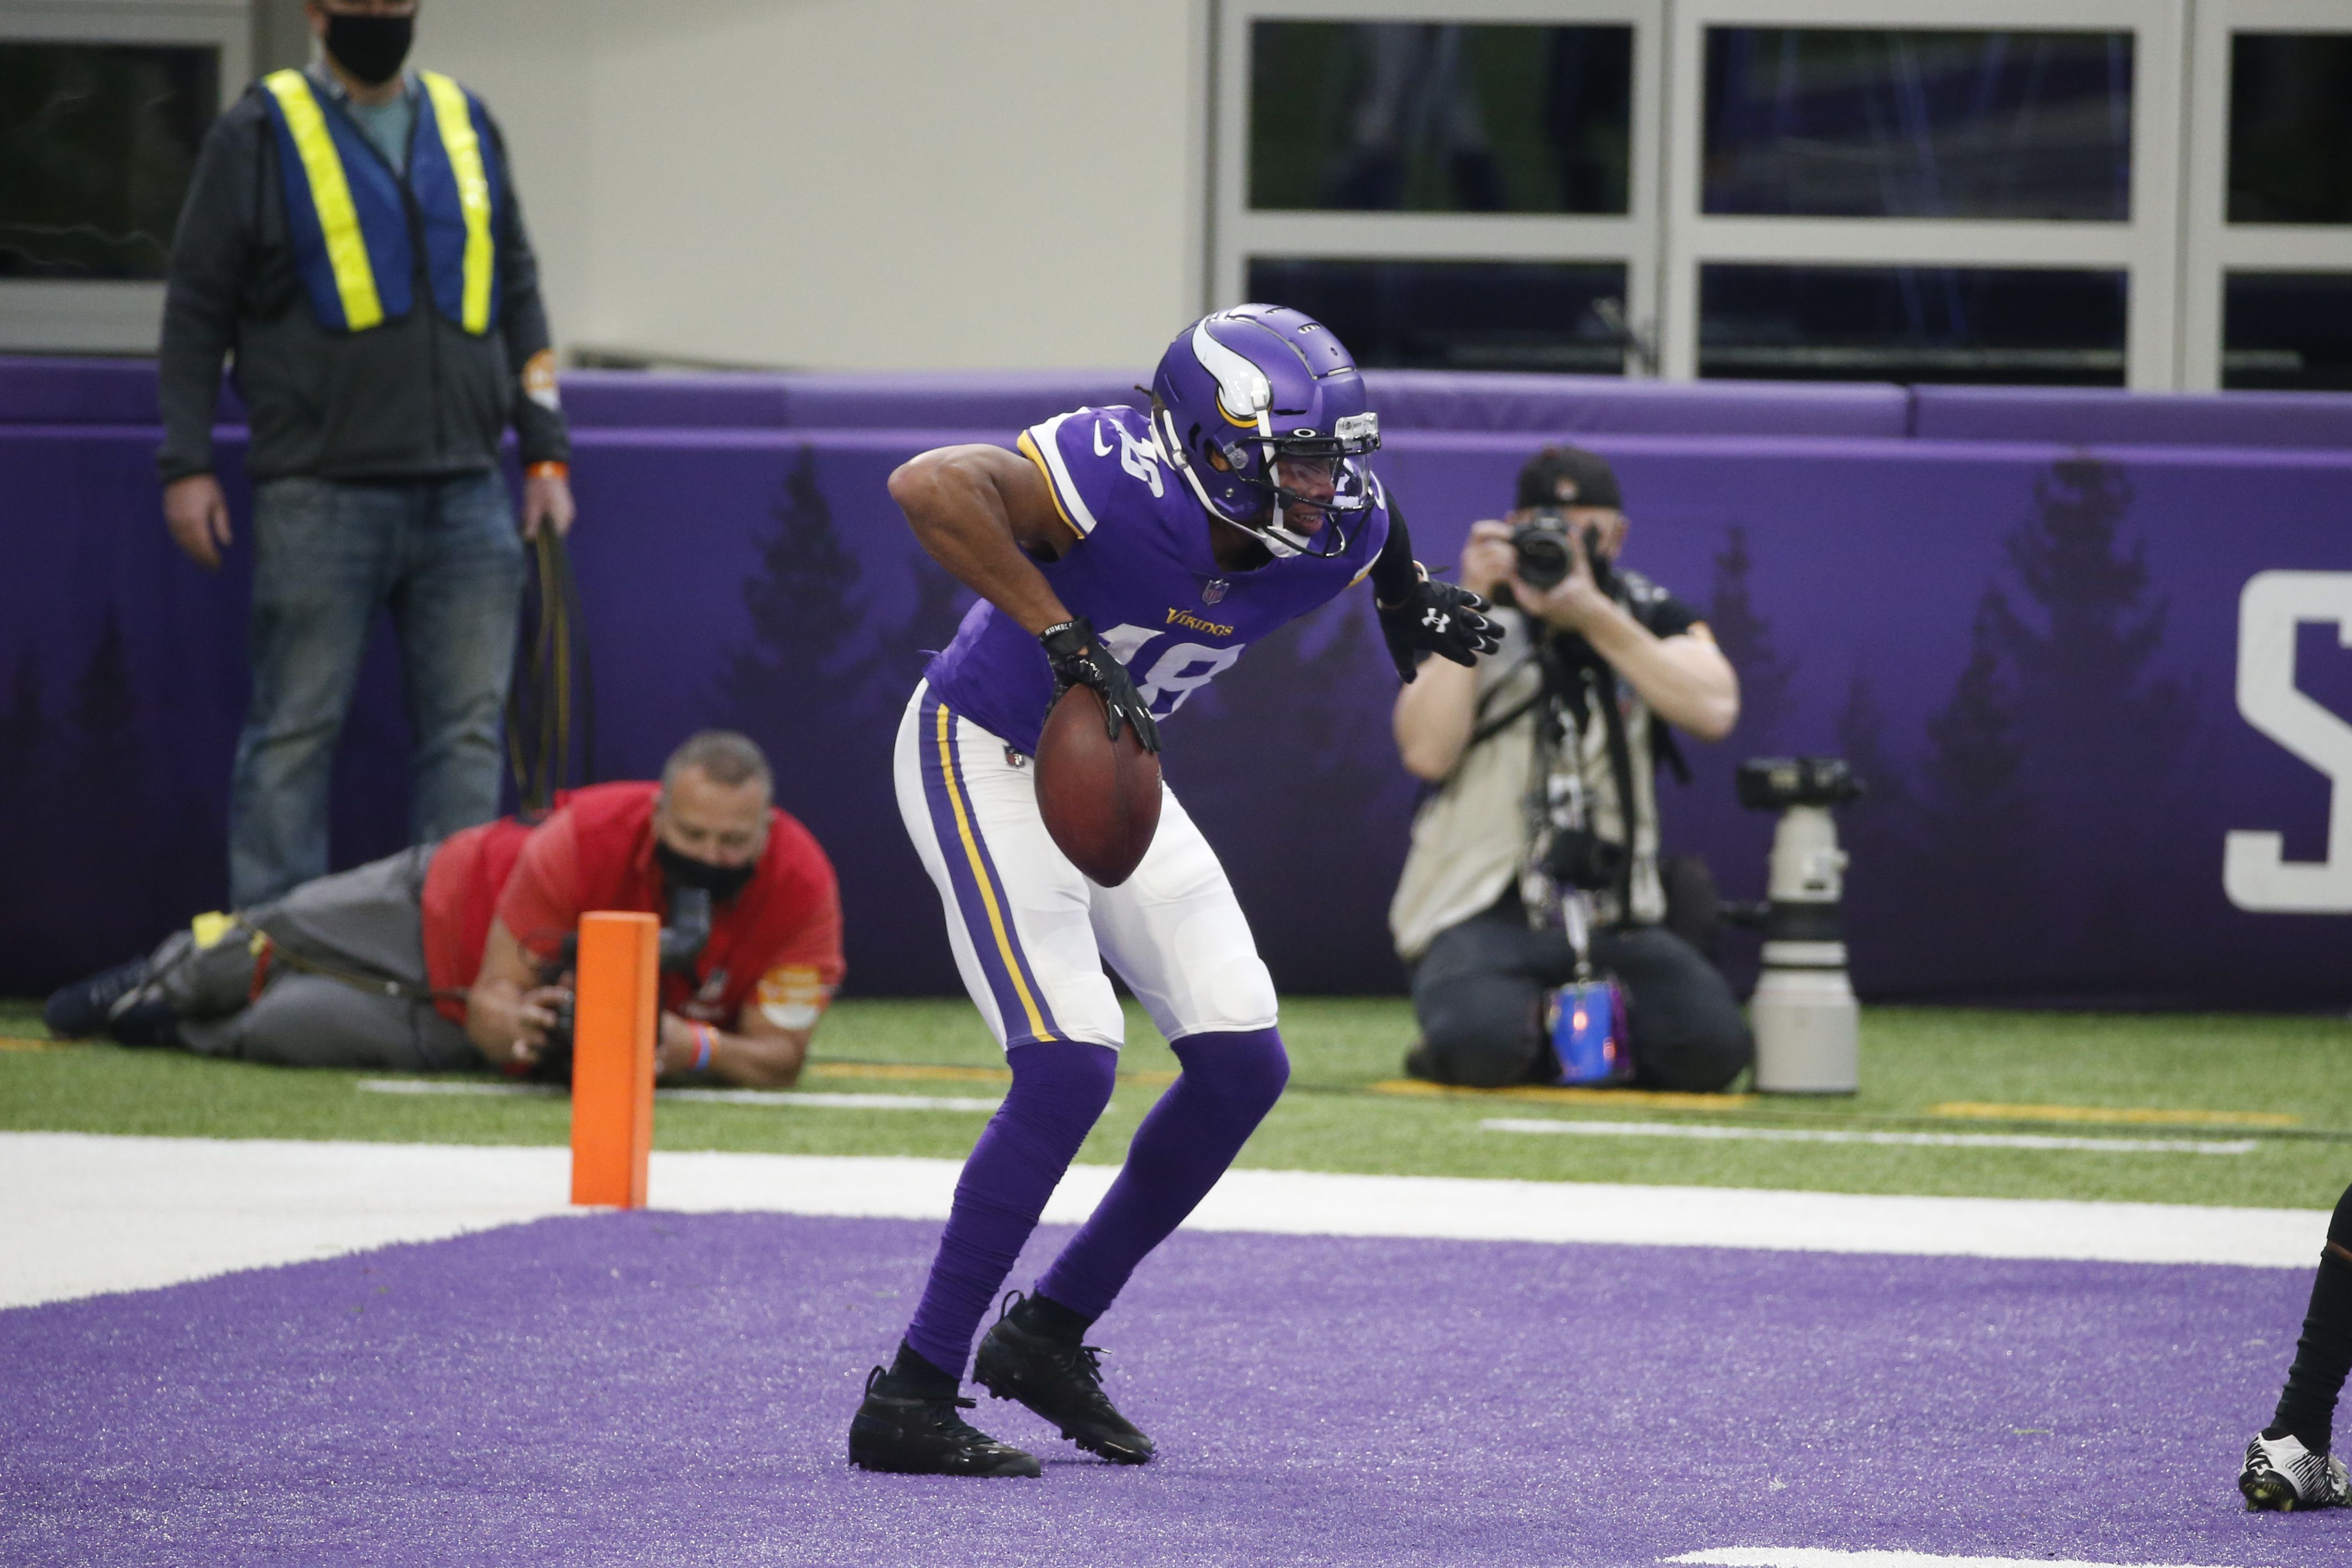 Vikings vs. Lions: Why you should be excited to watch this